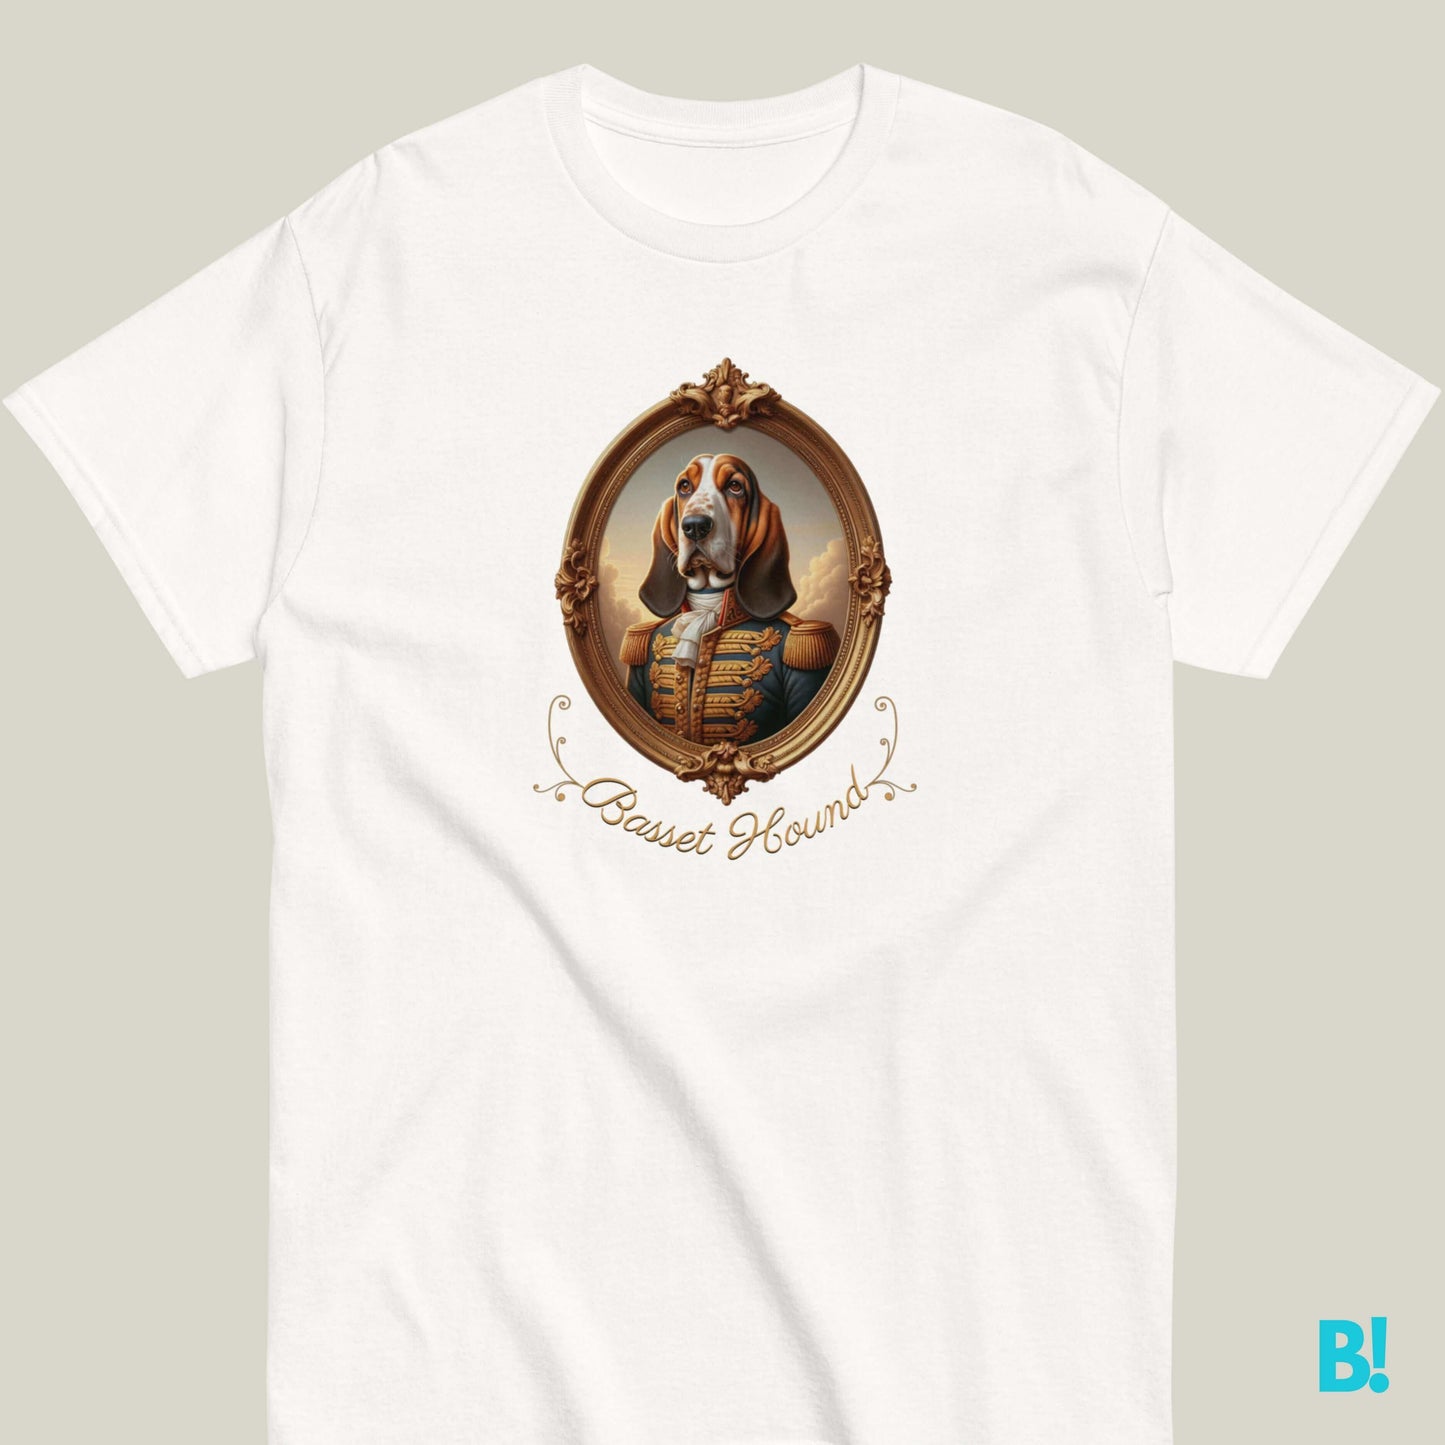 Charming Basset Hound Tee in 7 Colors | 100% Cotton Embrace charm with our Basset Hound portrait tee! Shop 100% cotton, unisex tees in 7 colors and sizes S-XXXL. Perfect fit guide included. €29.50 B!NKY Comfywear